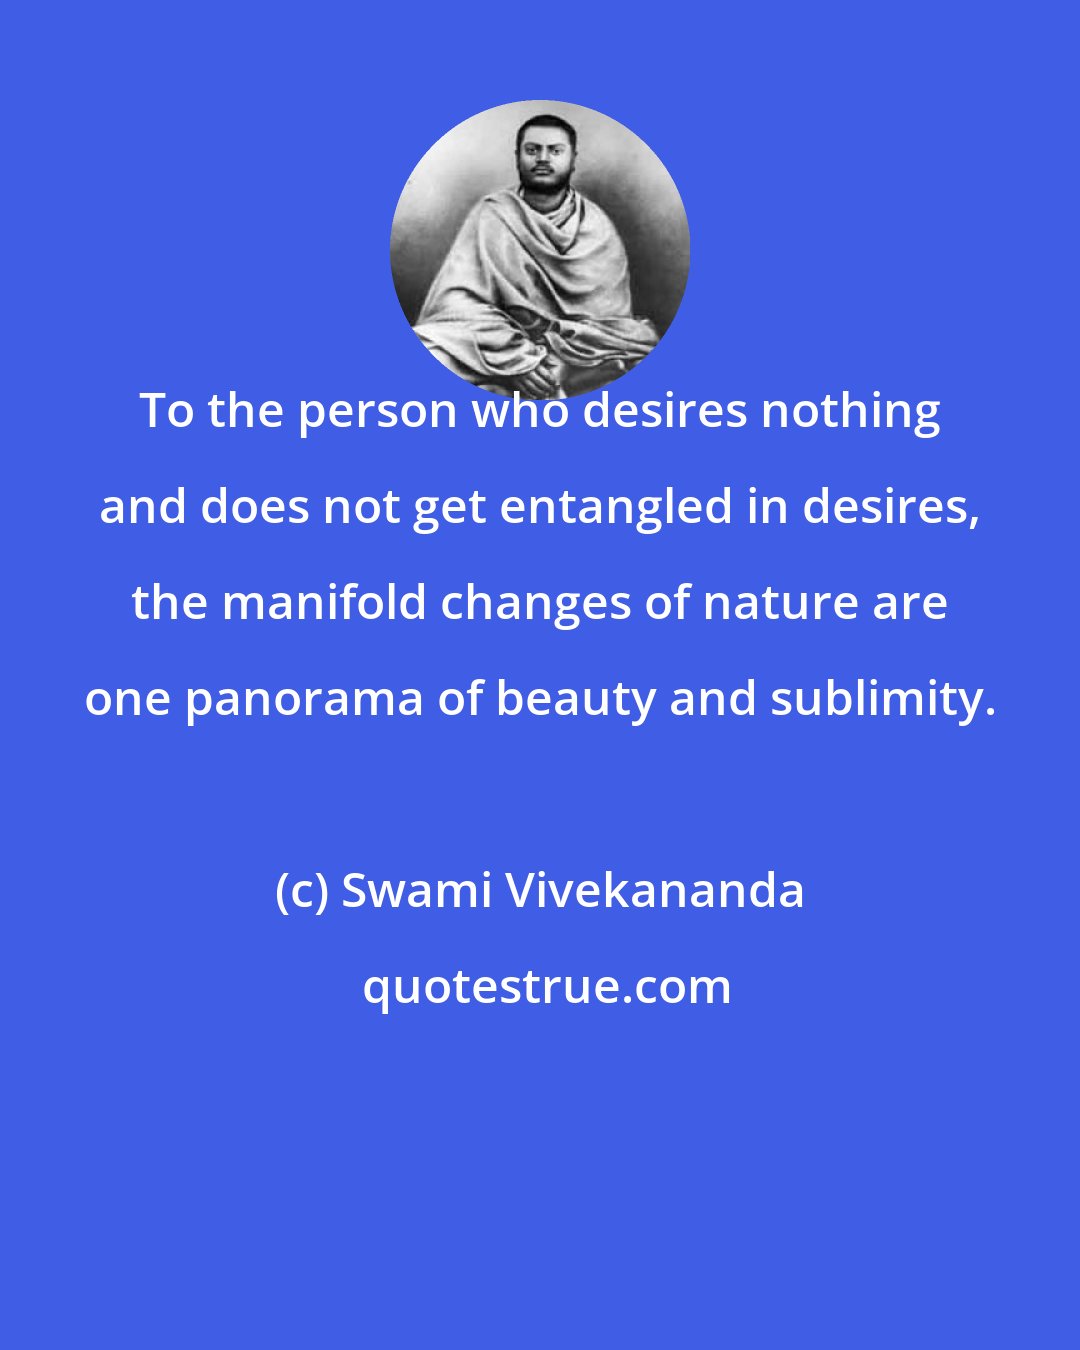 Swami Vivekananda: To the person who desires nothing and does not get entangled in desires, the manifold changes of nature are one panorama of beauty and sublimity.